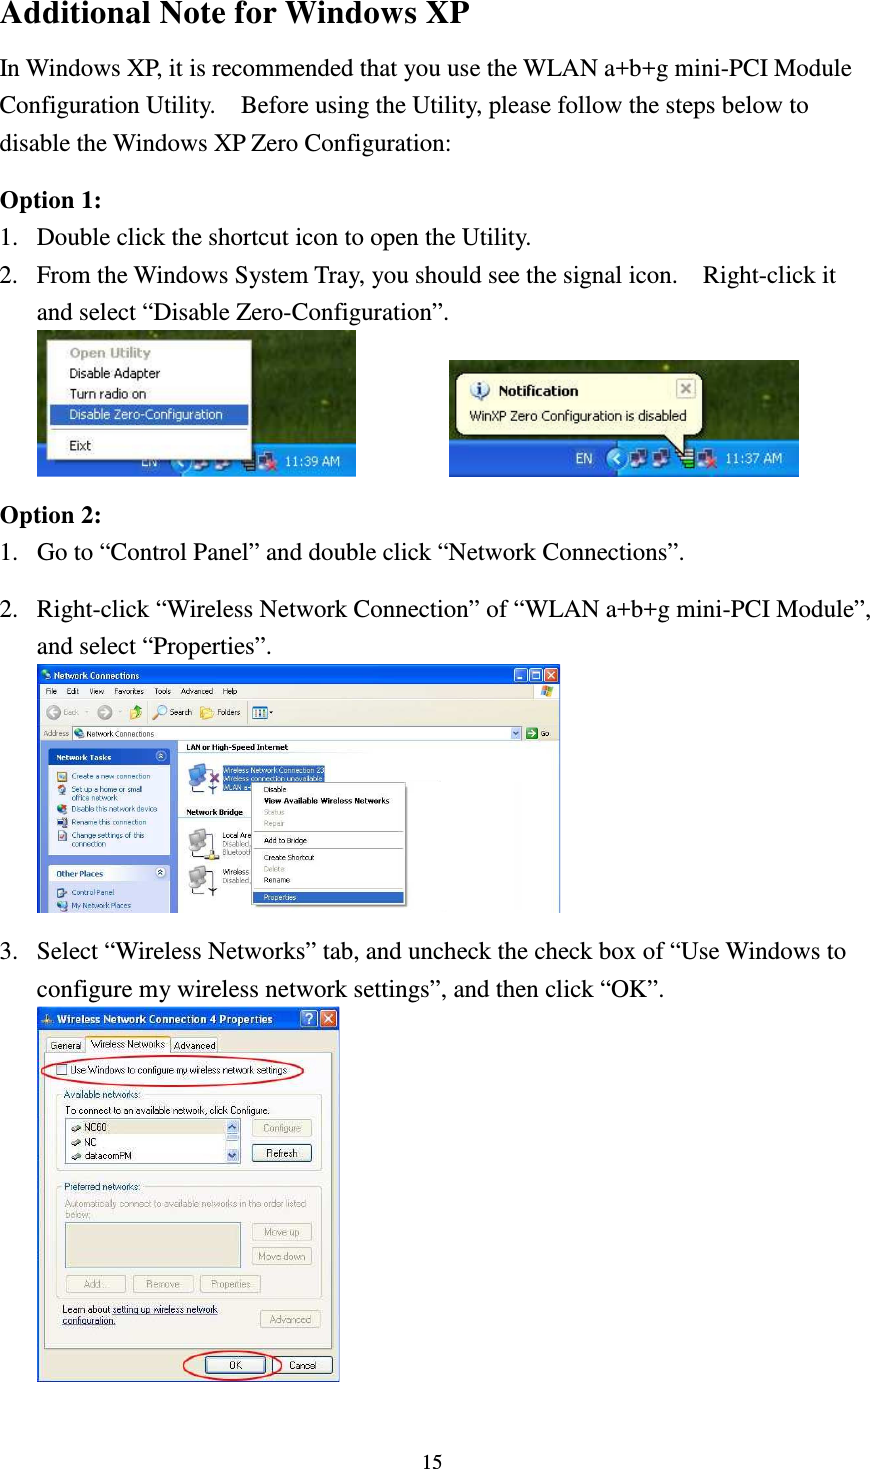   15Additional Note for Windows XP   In Windows XP, it is recommended that you use the WLAN a+b+g mini-PCI Module Configuration Utility.    Before using the Utility, please follow the steps below to disable the Windows XP Zero Configuration:  Option 1: 1. Double click the shortcut icon to open the Utility. 2. From the Windows System Tray, you should see the signal icon.    Right-click it and select “Disable Zero-Configuration”.      Option 2: 1. Go to “Control Panel” and double click “Network Connections”.  2. Right-click “Wireless Network Connection” of “WLAN a+b+g mini-PCI Module”, and select “Properties”.   3. Select “Wireless Networks” tab, and uncheck the check box of “Use Windows to configure my wireless network settings”, and then click “OK”.  